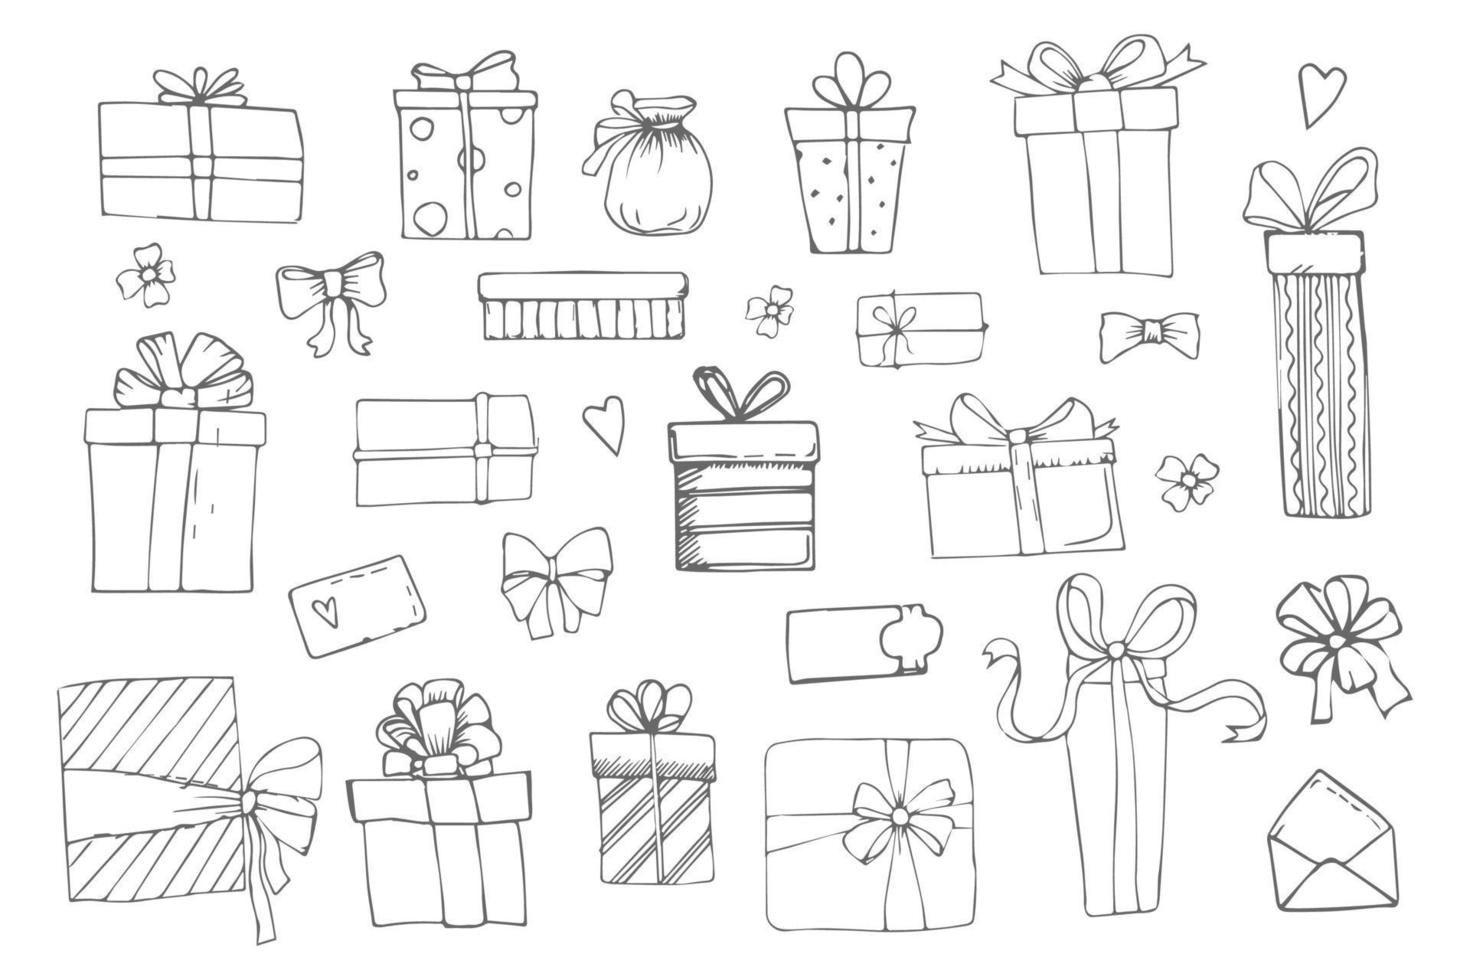 hand-drawn doodle illustration for gift card gift box, bow vector